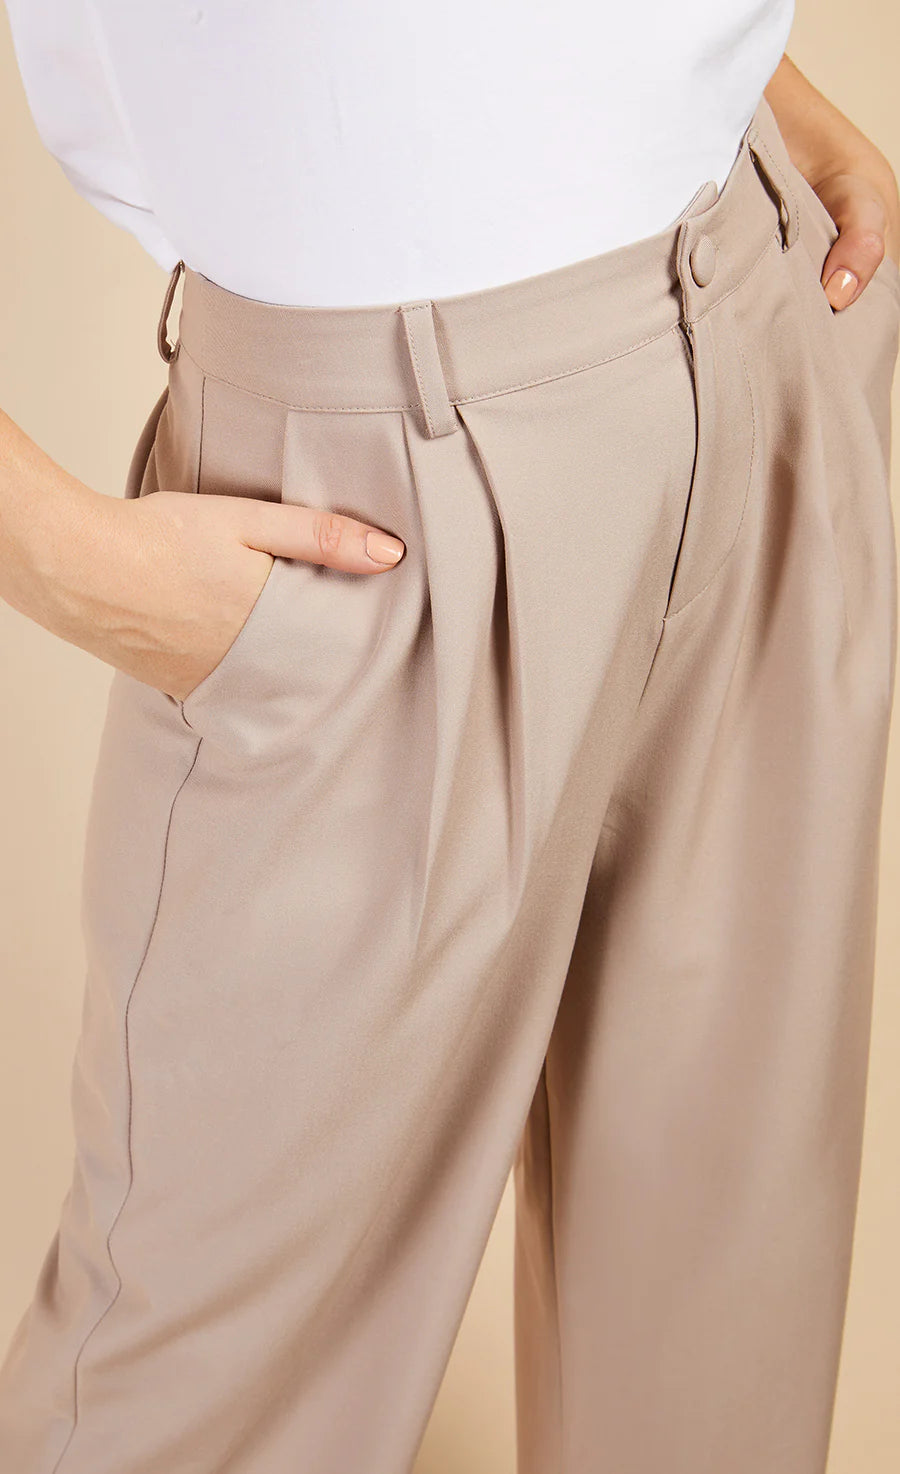 Stone trousers by Vogue Williams